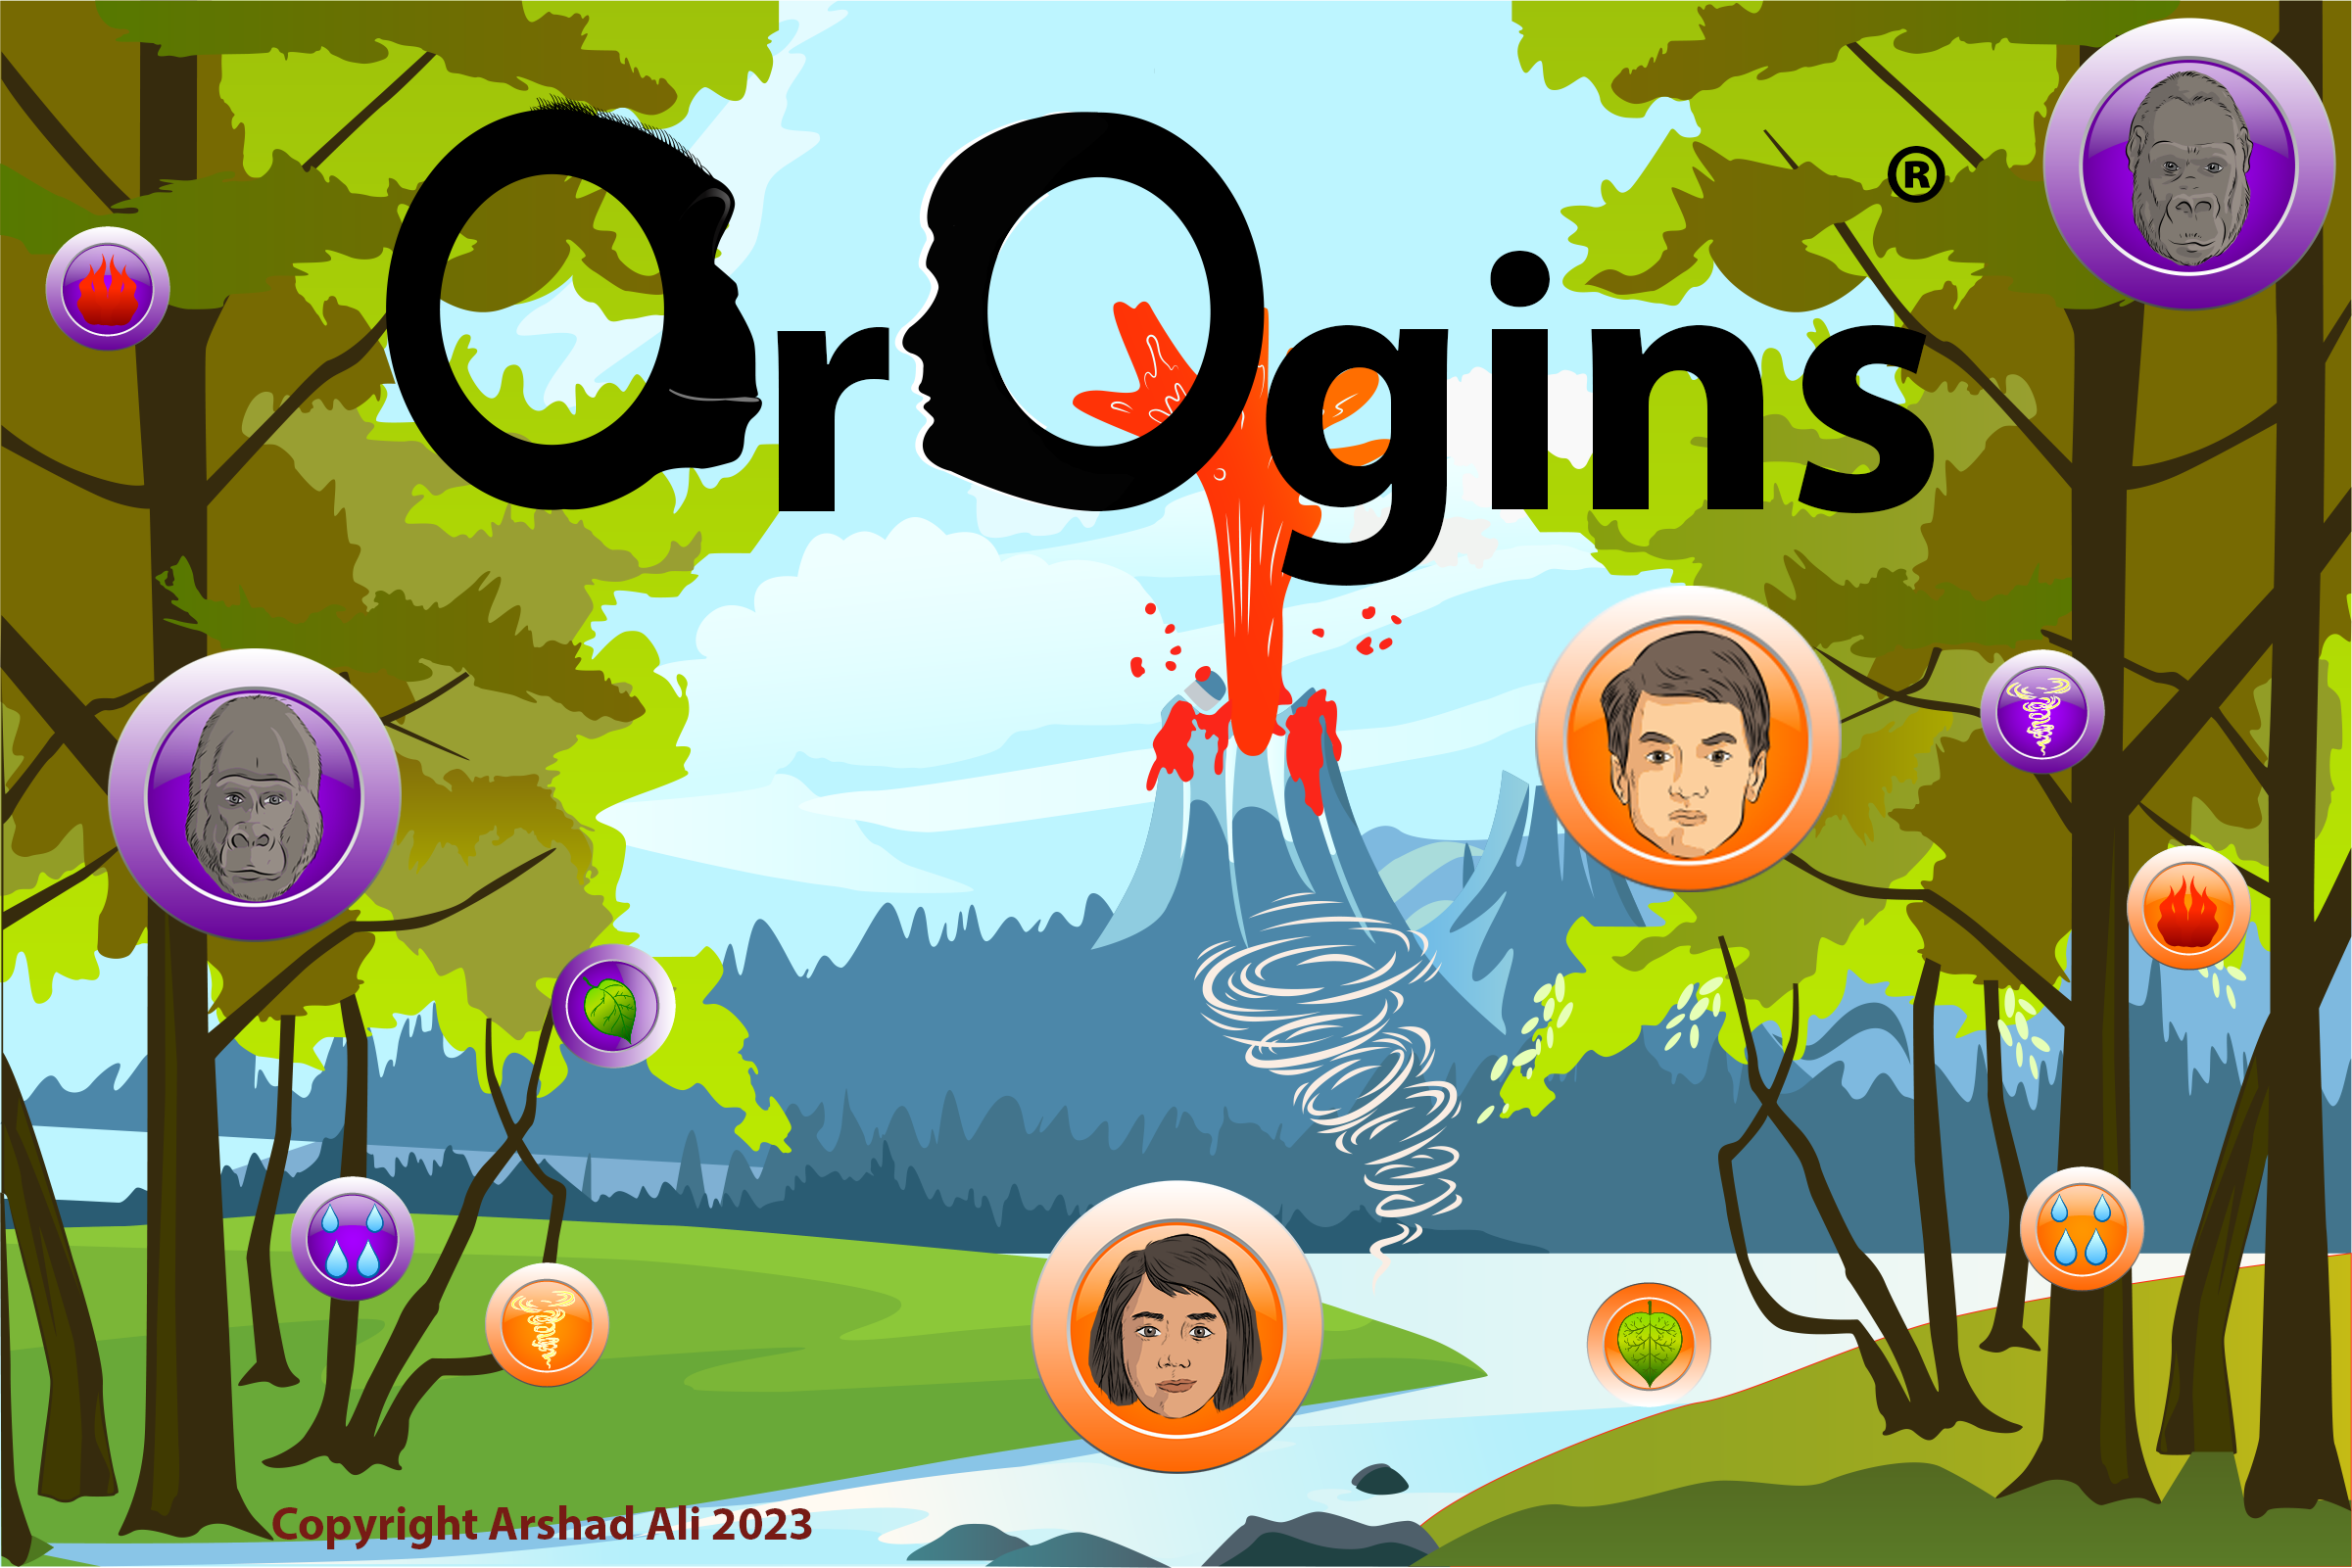 Orogins play the game